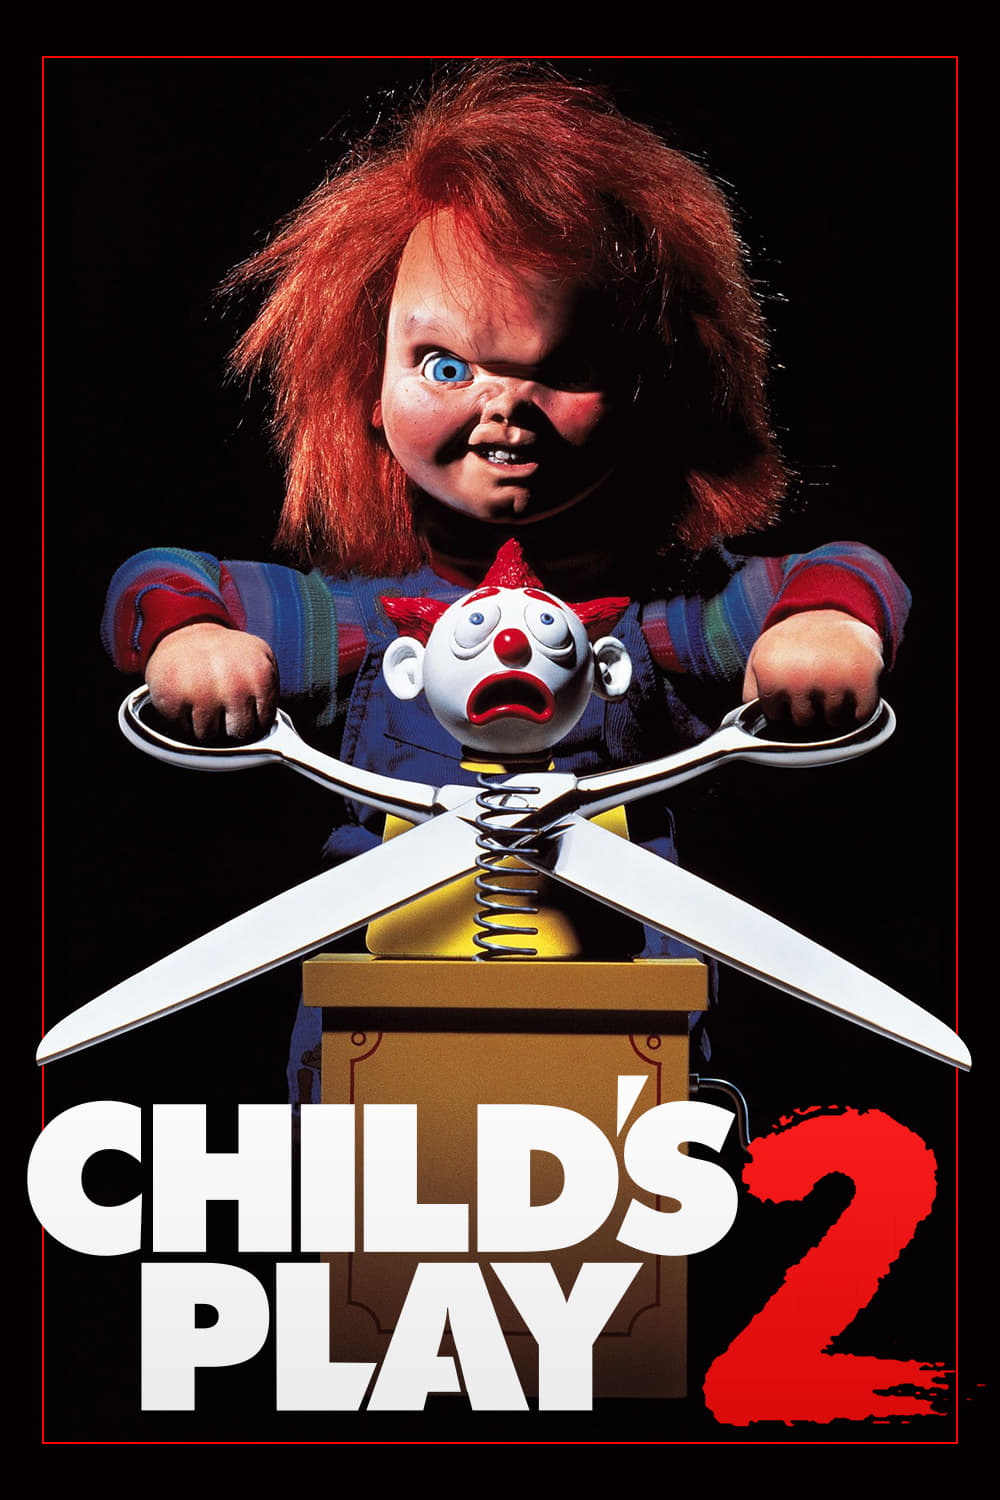 Child_s Play 2 (1990) Movie Poster High Quality Glossy Paper A1 A2 A3 A4 A3 Framed or Unframed!!!